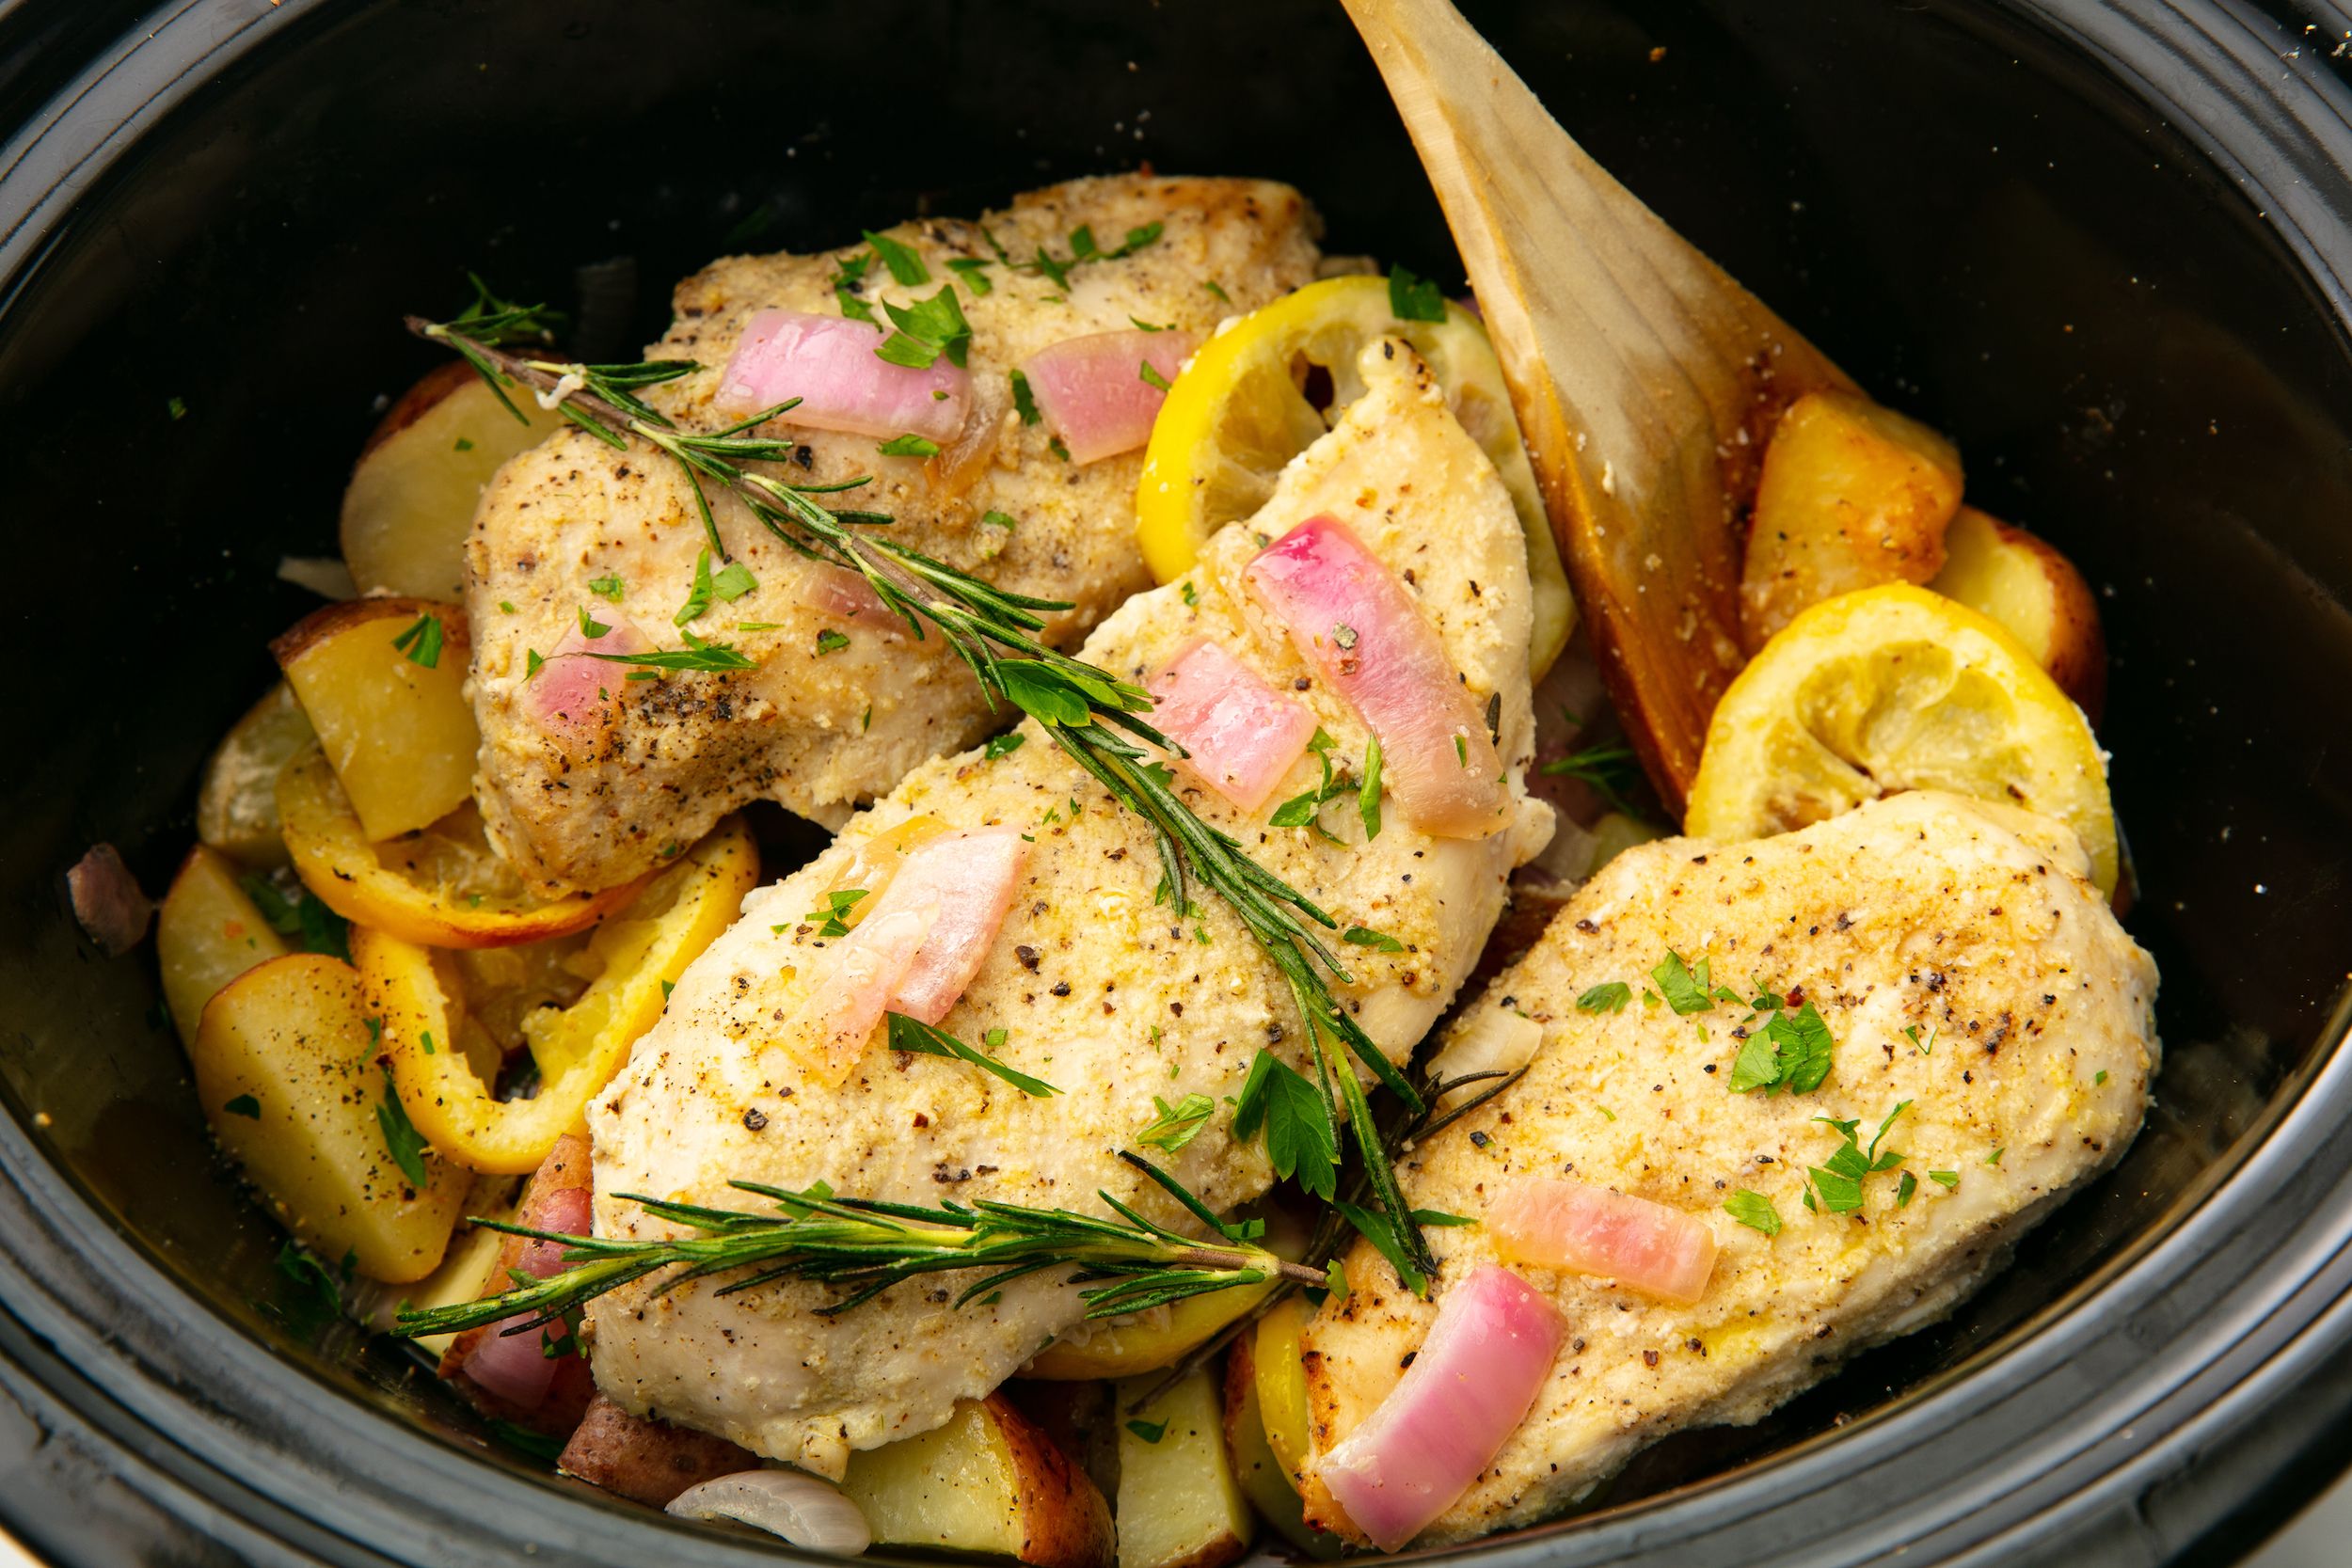 How To Make The Best Slow Cooker Chicken Breast Recipe,Cat Meowing At Night